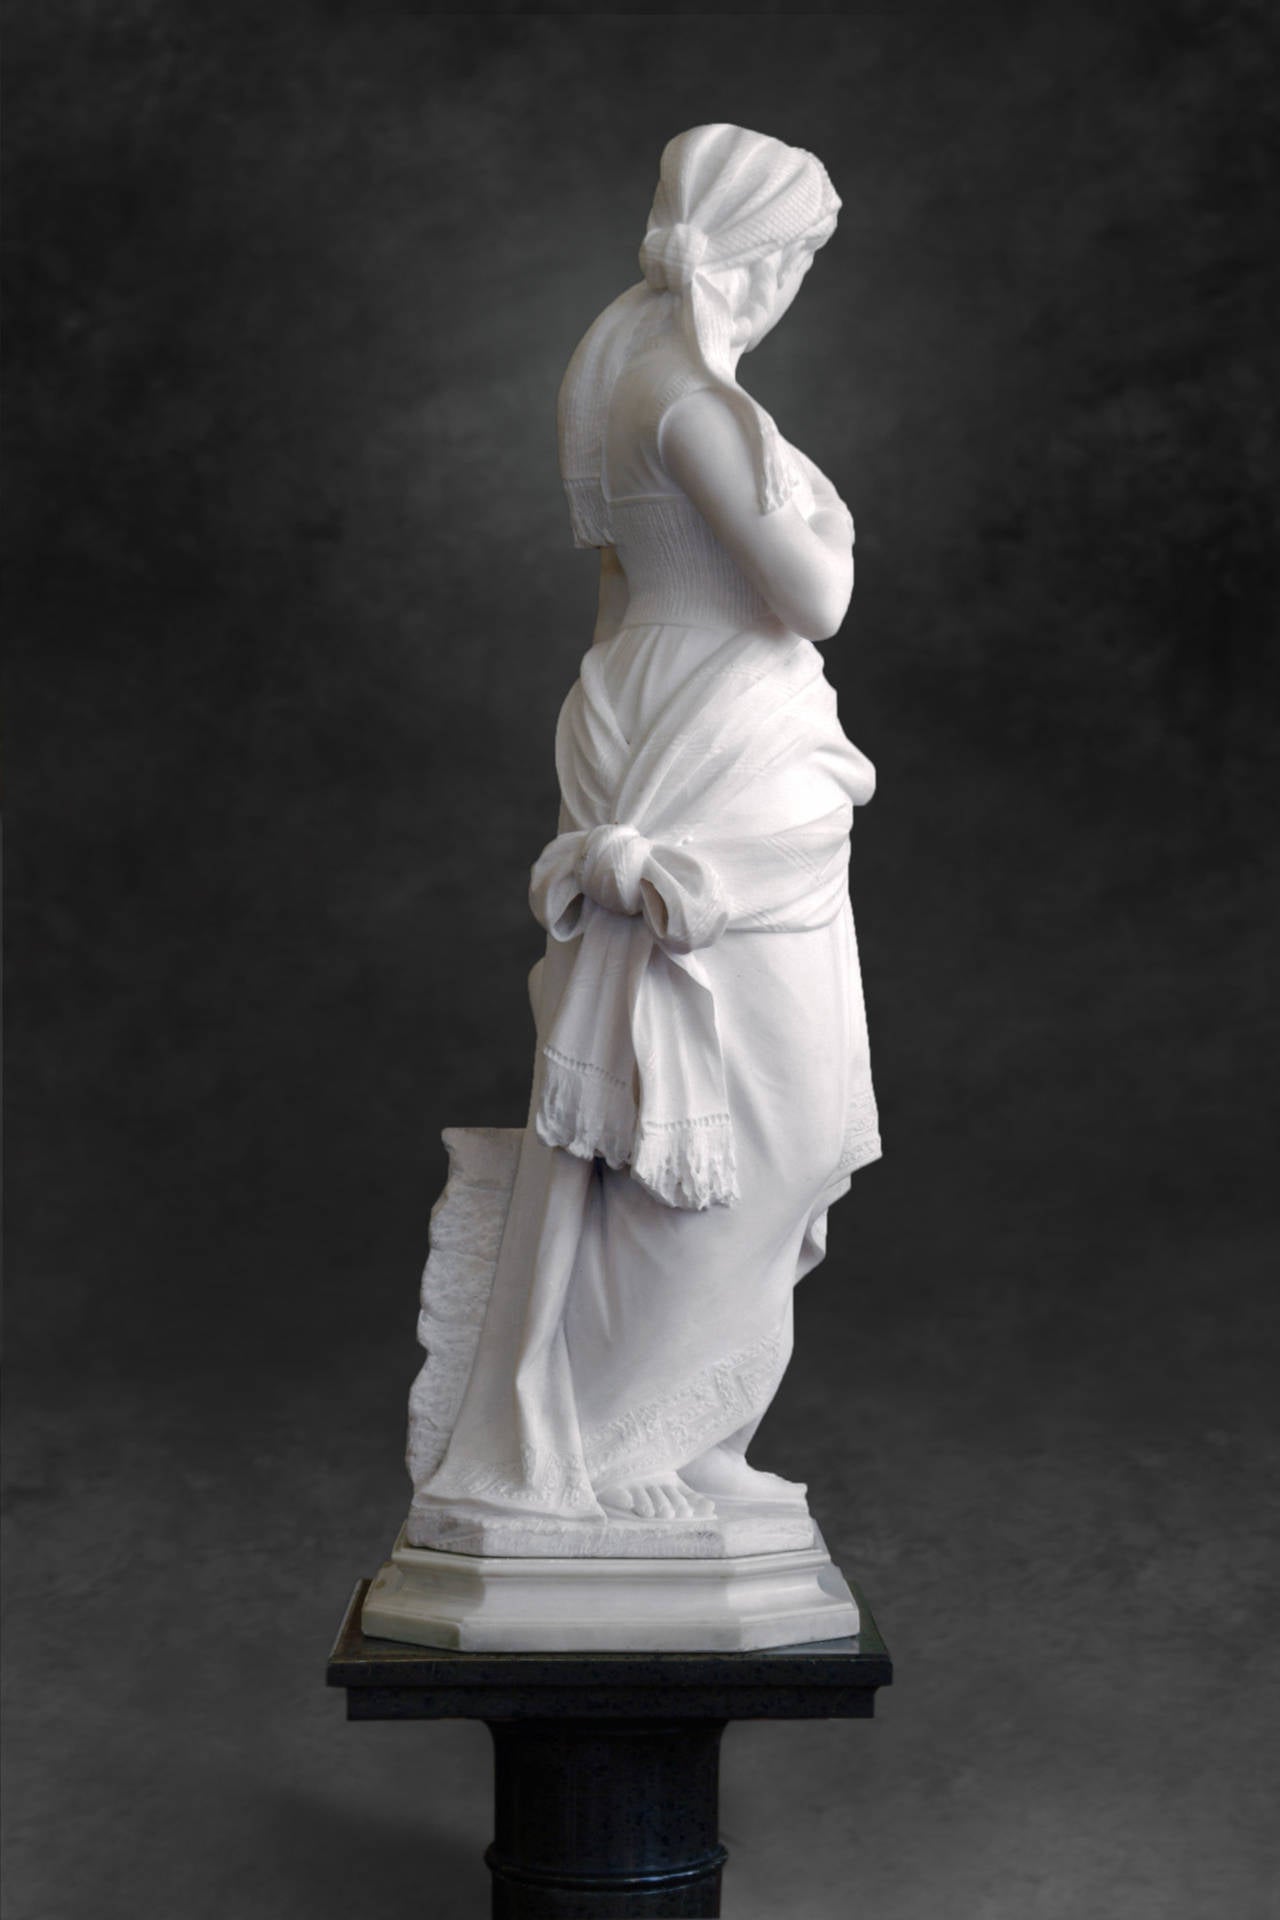 An Antique Italian Carrera Marble Sculpture by the well